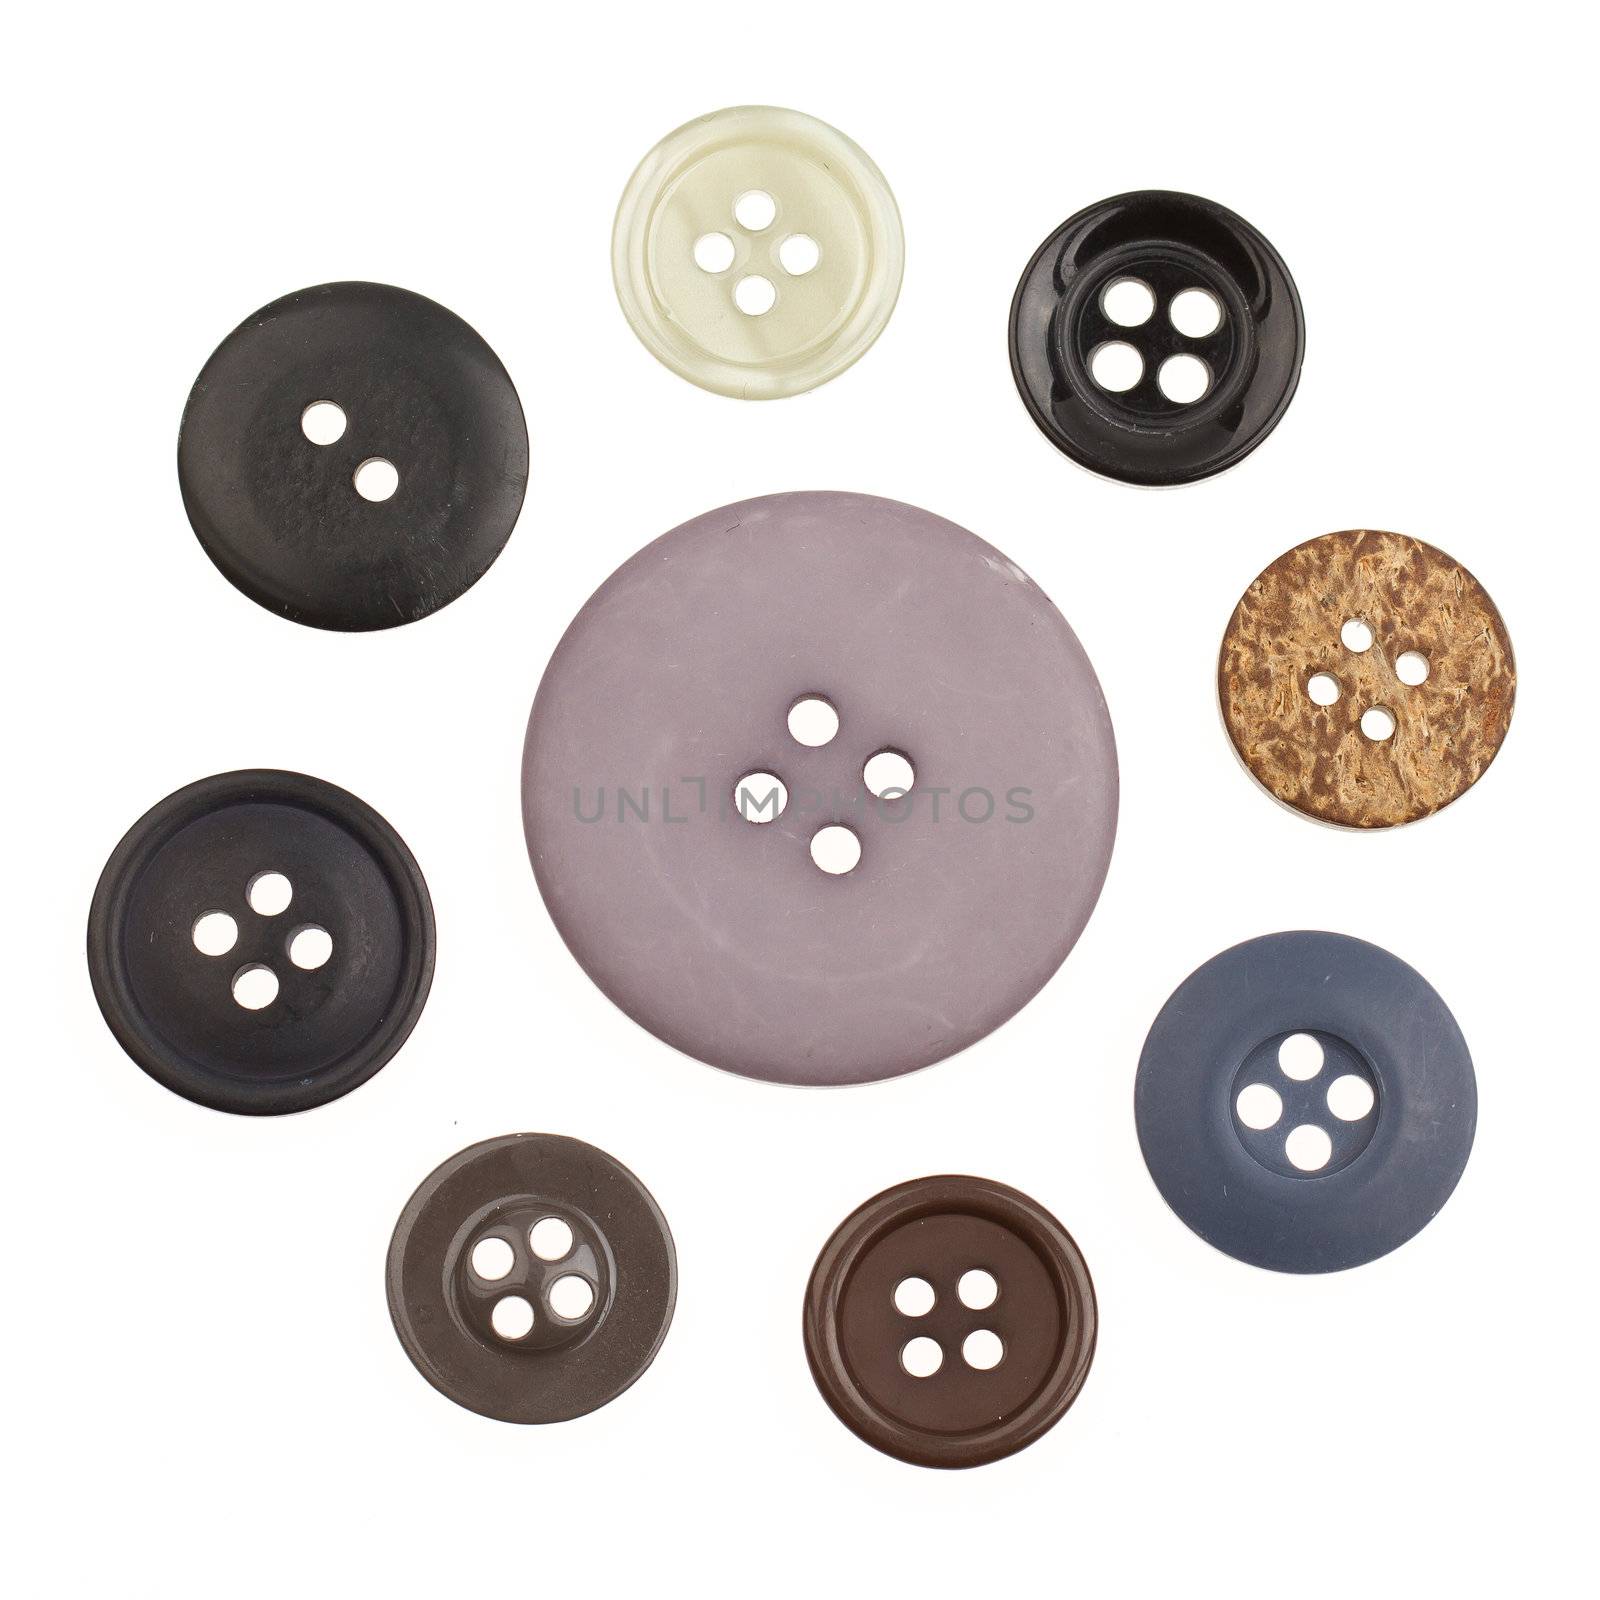 A collection of different buttons on a white background